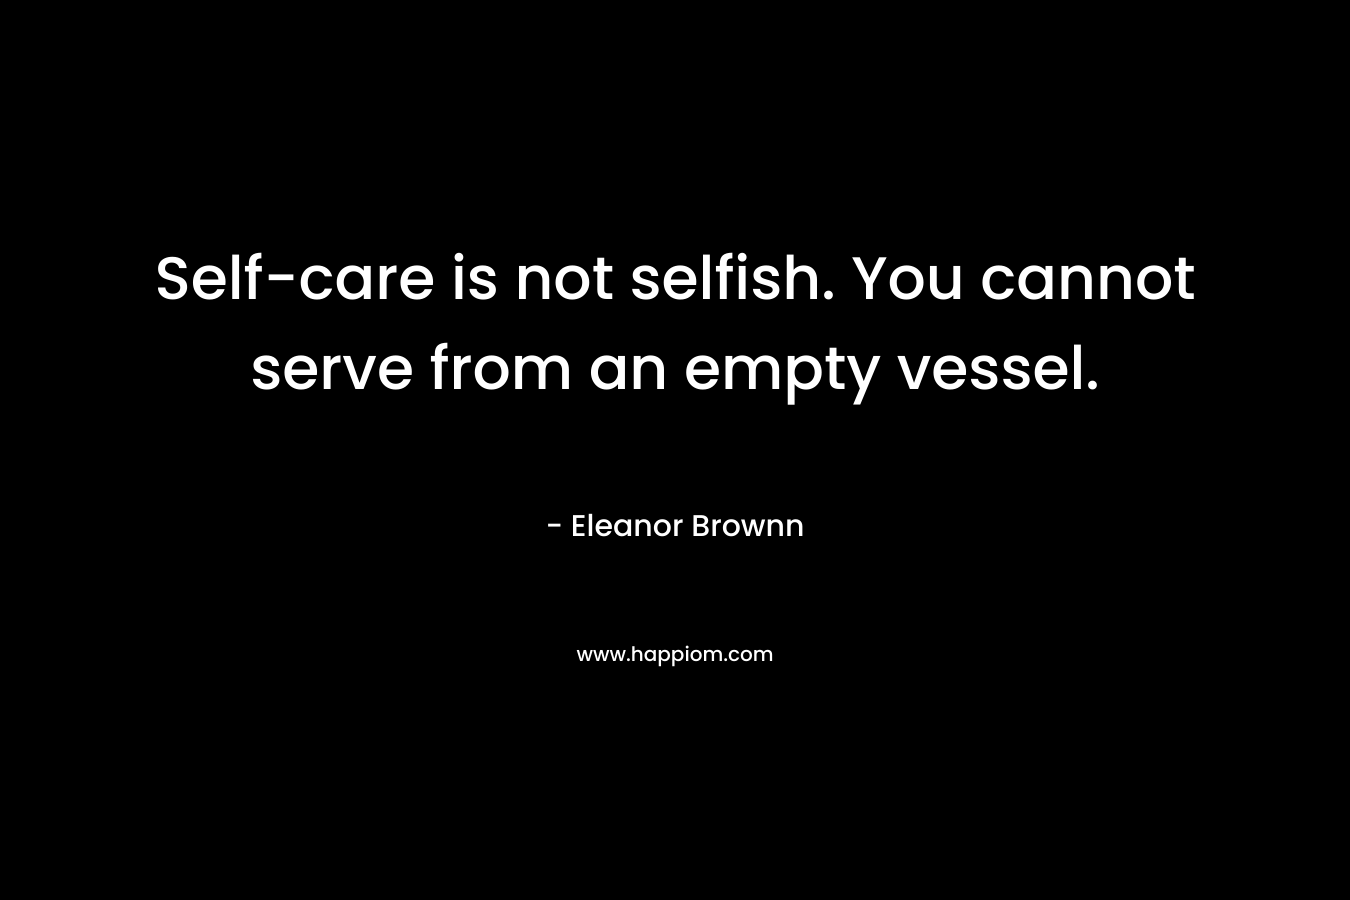 Self-care is not selfish. You cannot serve from an empty vessel.